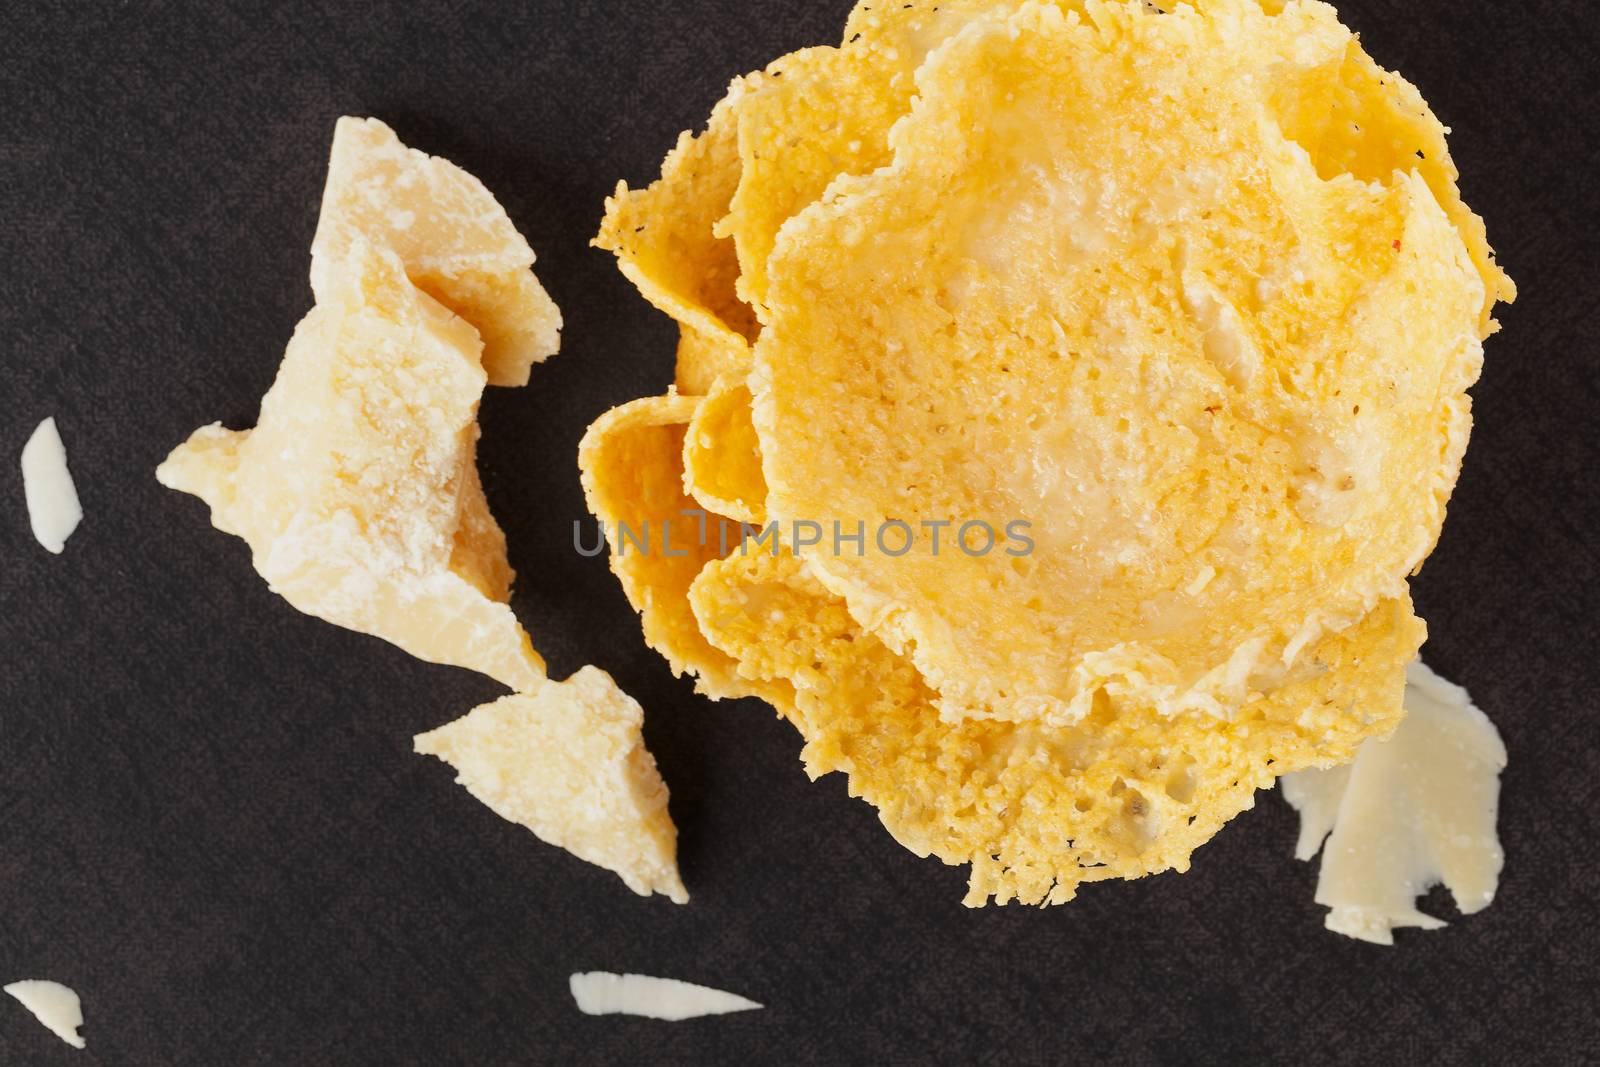 Parmigiano pieces and parmigiano basket on black background, top view. Culinary cheese eating.